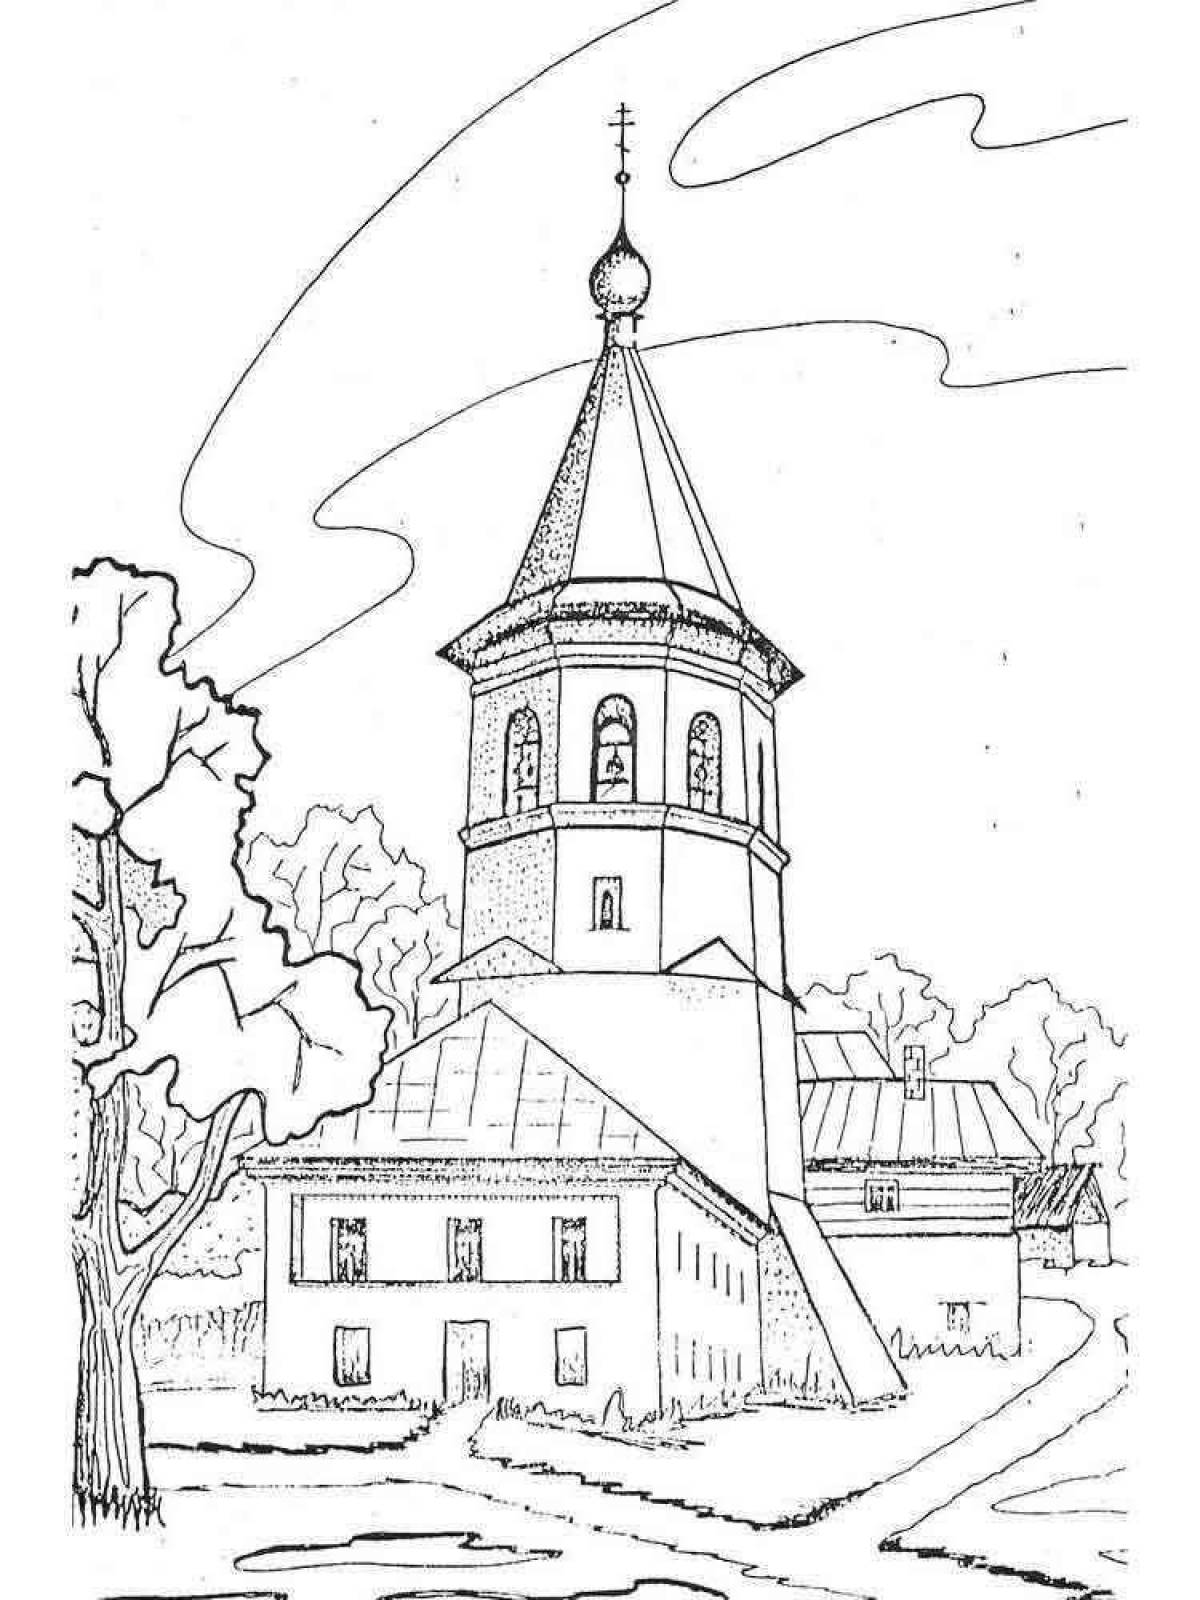 Shining church coloring pages for kids